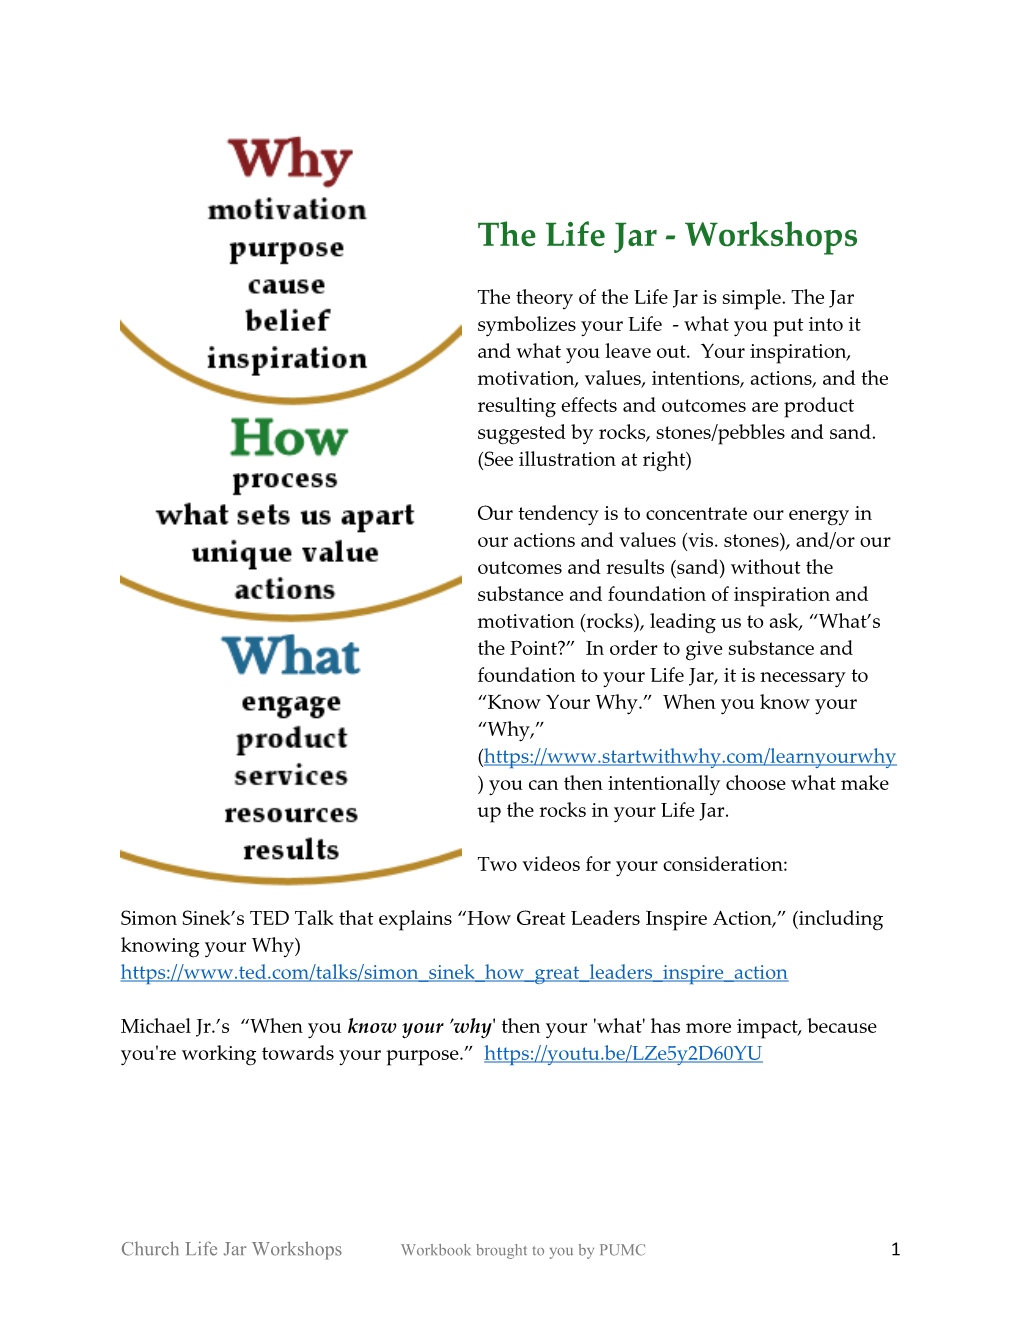 Know Your Why Church Life Jar Workshops